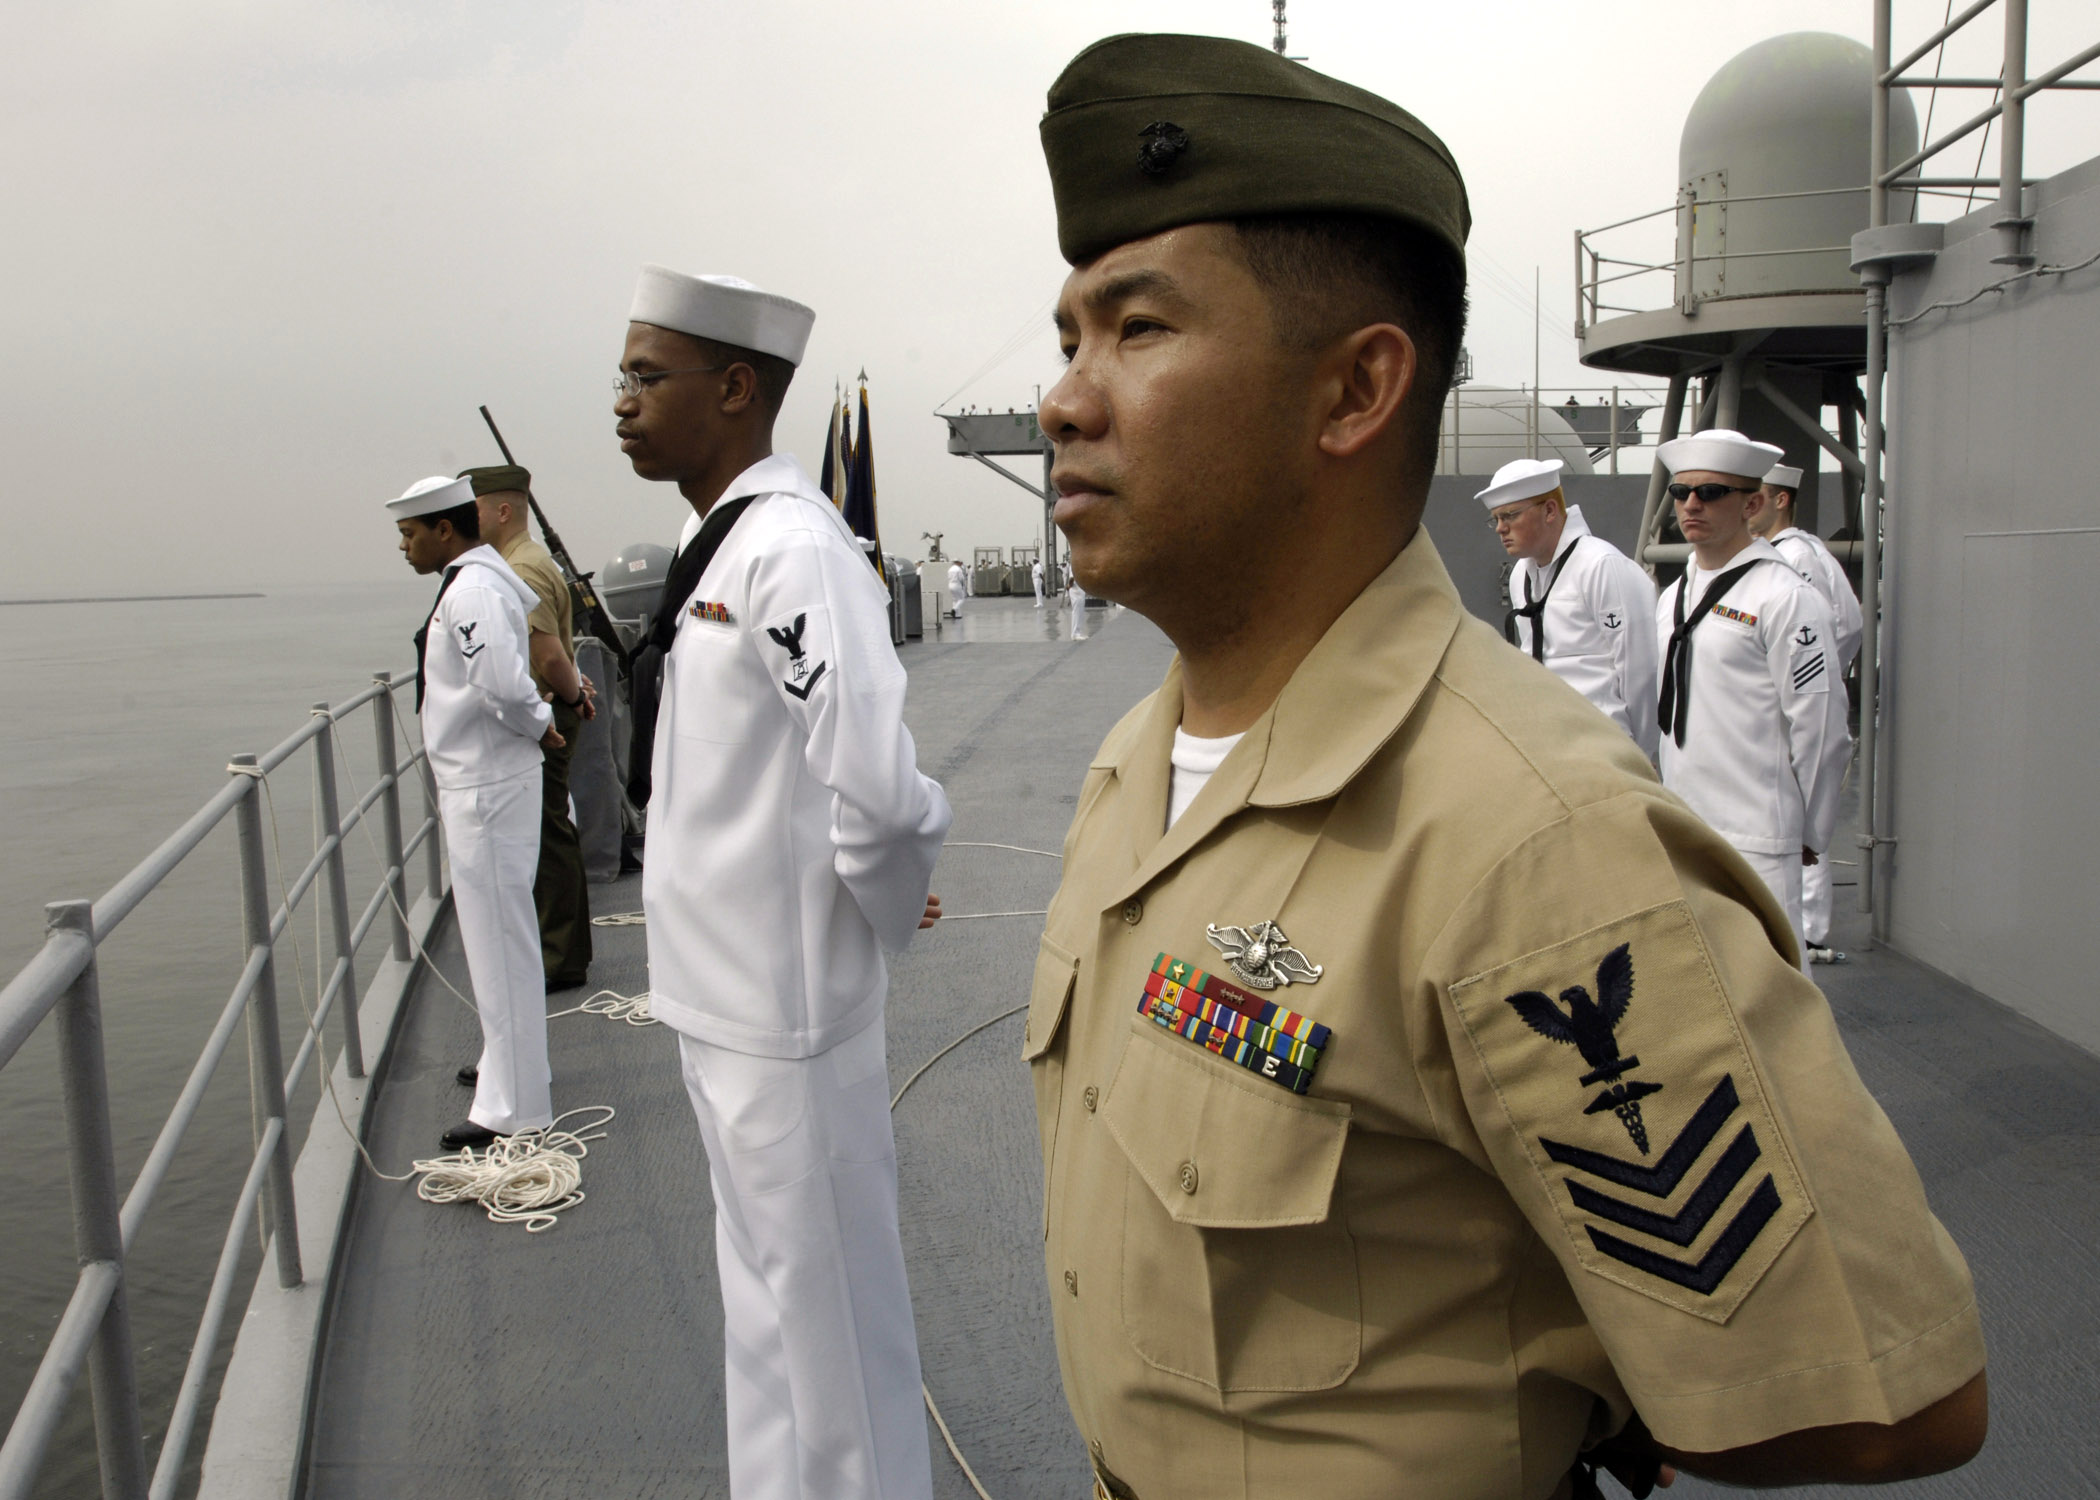 See also: Uniforms of the United States Marine Corps